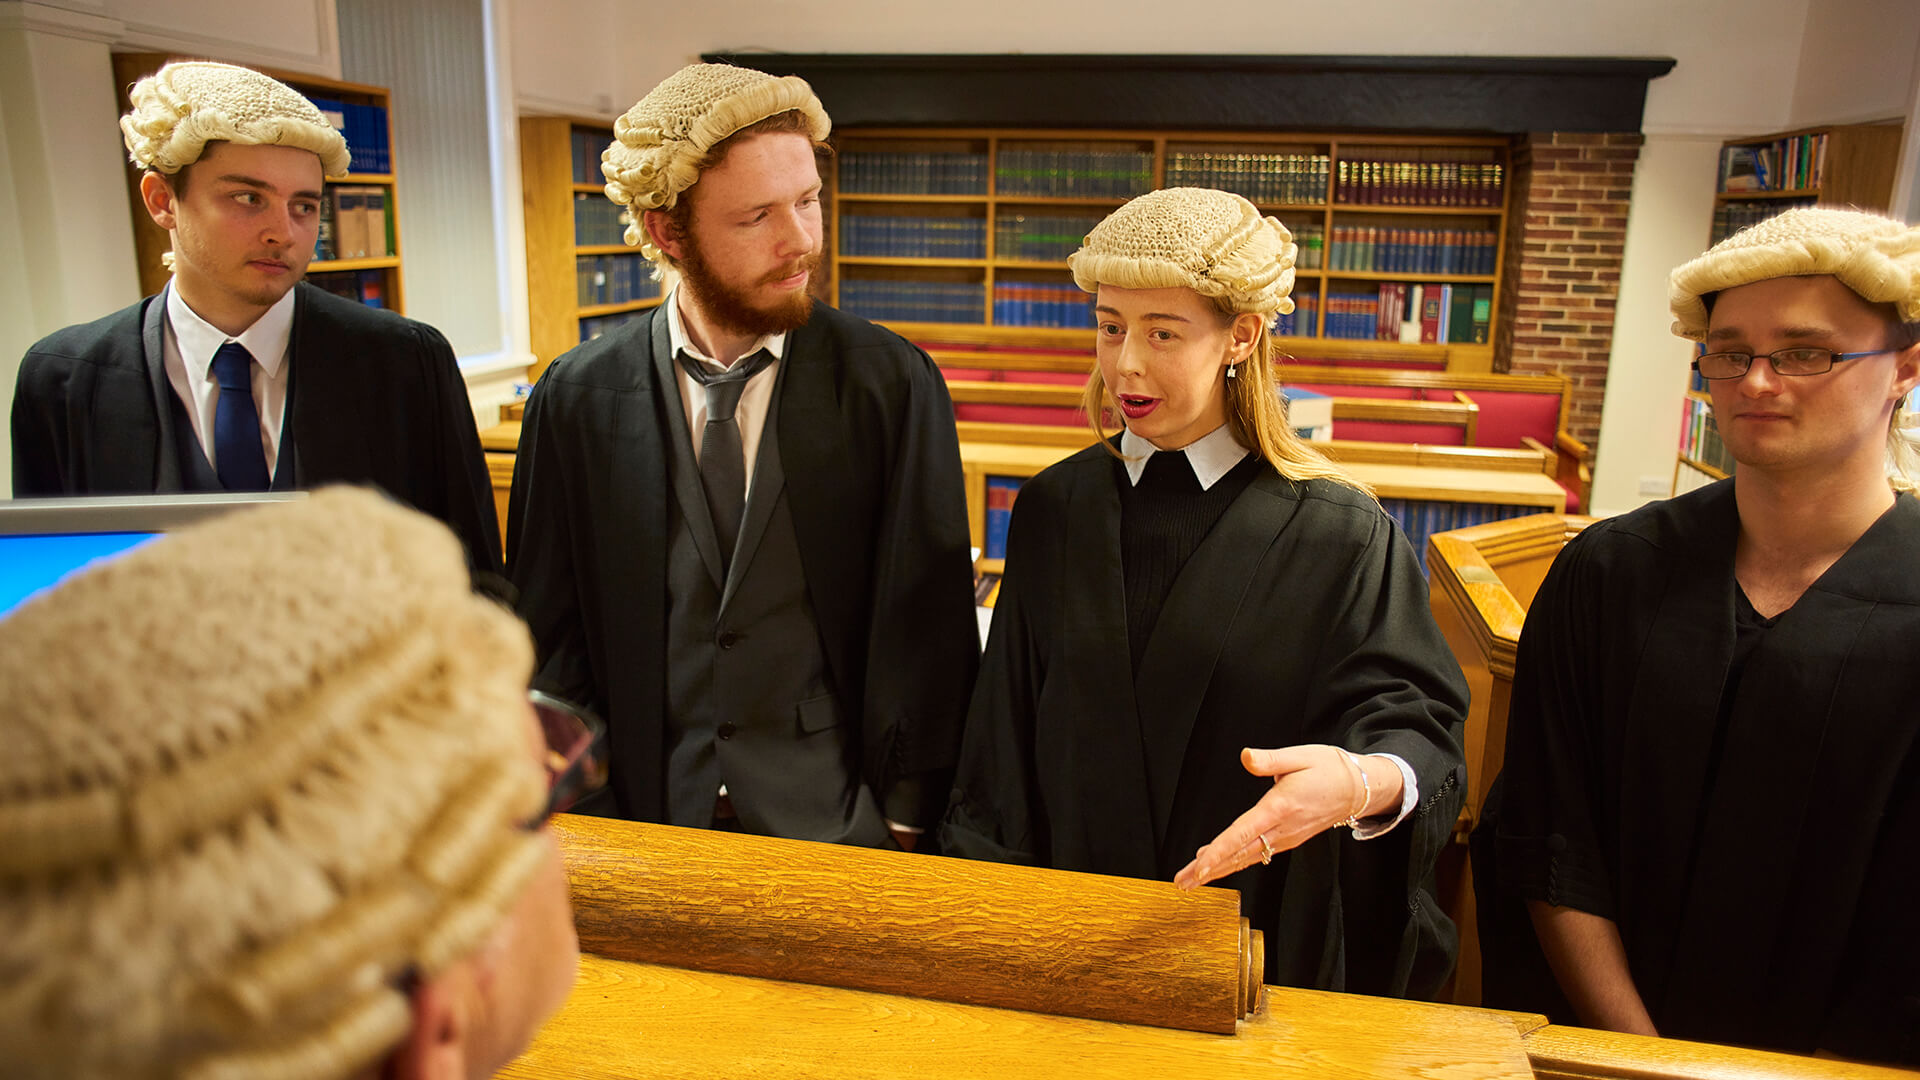 Students practice their mooting skills in a mock courtroom and consult with the judge.